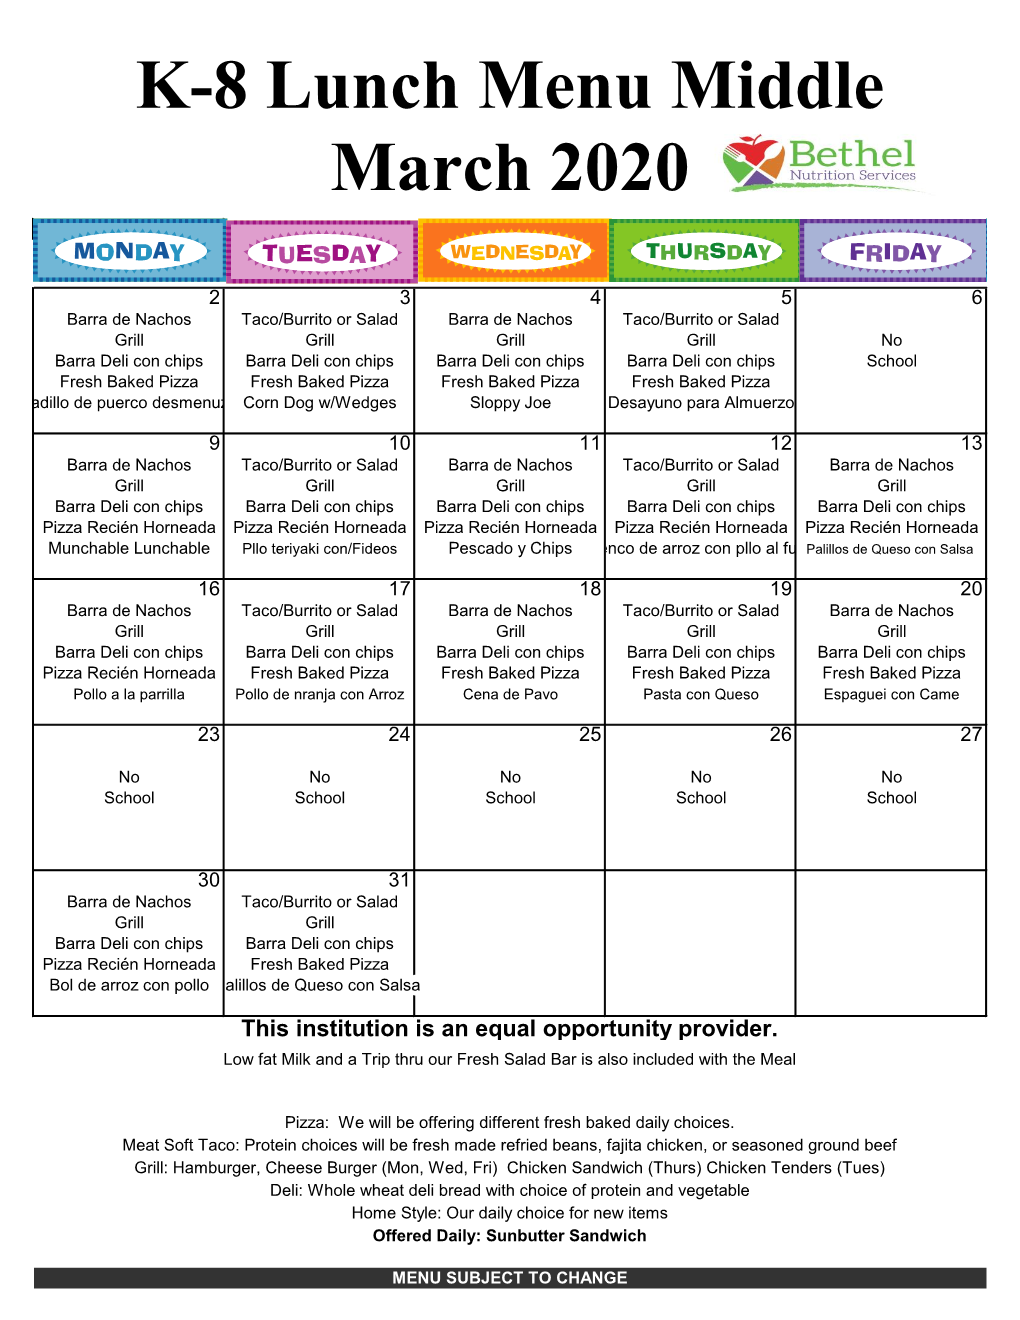 K-8 Lunch Menu Middle March 2020 NEW-Chicken Wraps